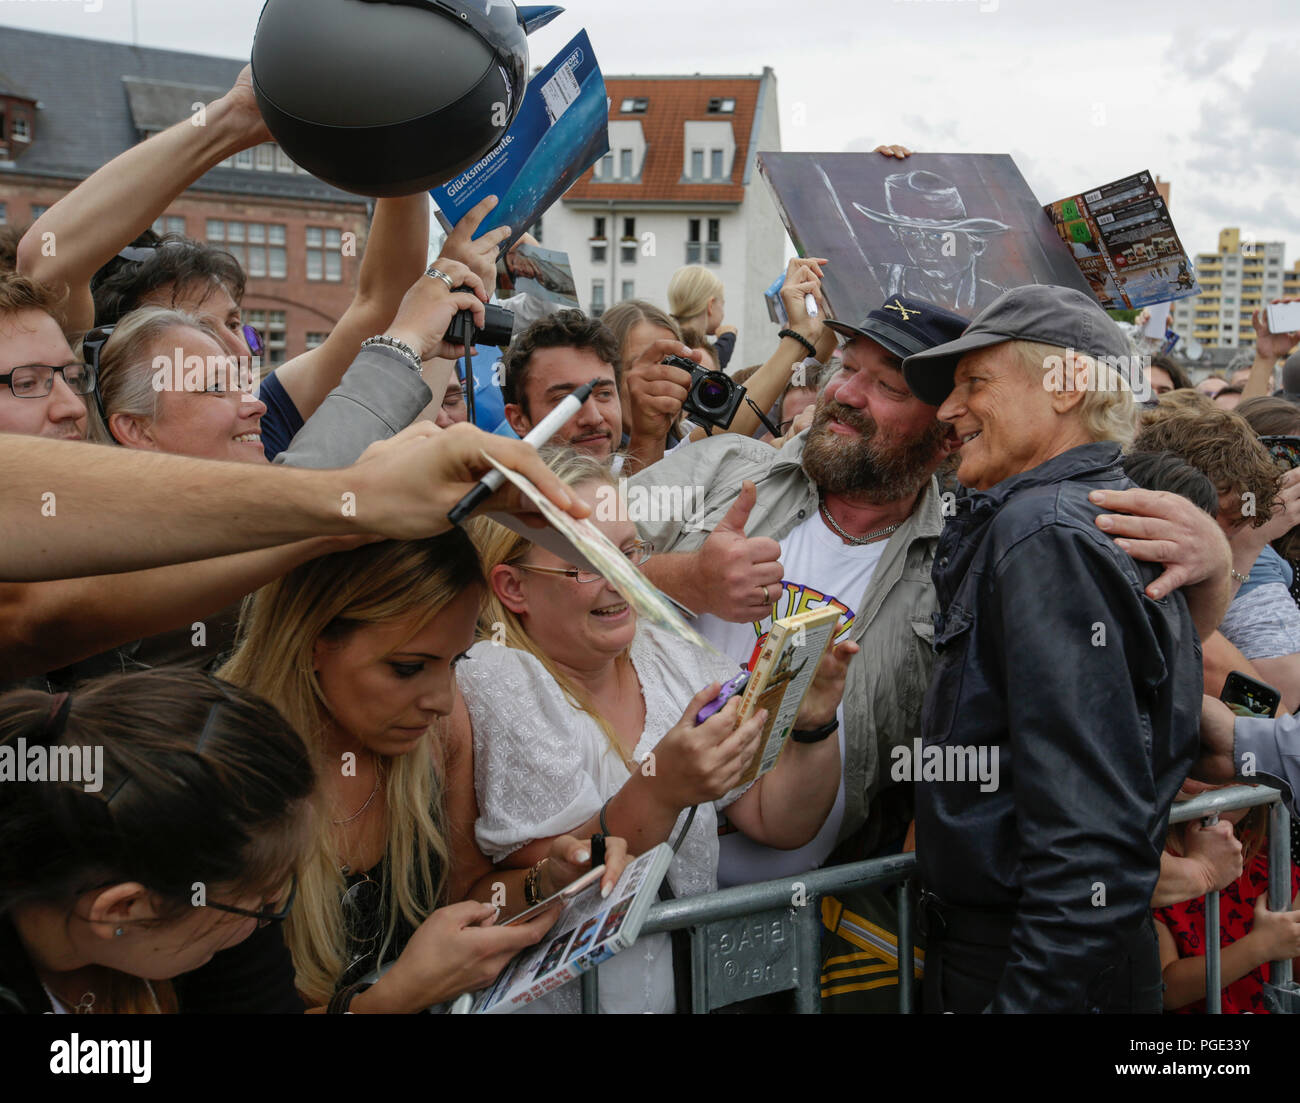 Worms, Germany. 24th Aug, 2018. Terence Hill poses for a picture with a fan, who is a look-alike of his long term film partner Bud Spencer. Italian actor Terence Hill visited the German city of Worms, to present his new movie (My Name is somebody). Terence Hill added the stop in Worms to his movie promotion tour in Germany, to visit a pedestrian bridge, that is unofficially named Terence-Hill-Bridge (officially Karl-Kubel-Bridge). Credit: Michael Debets/Pacific Press/Alamy Live News Stock Photo